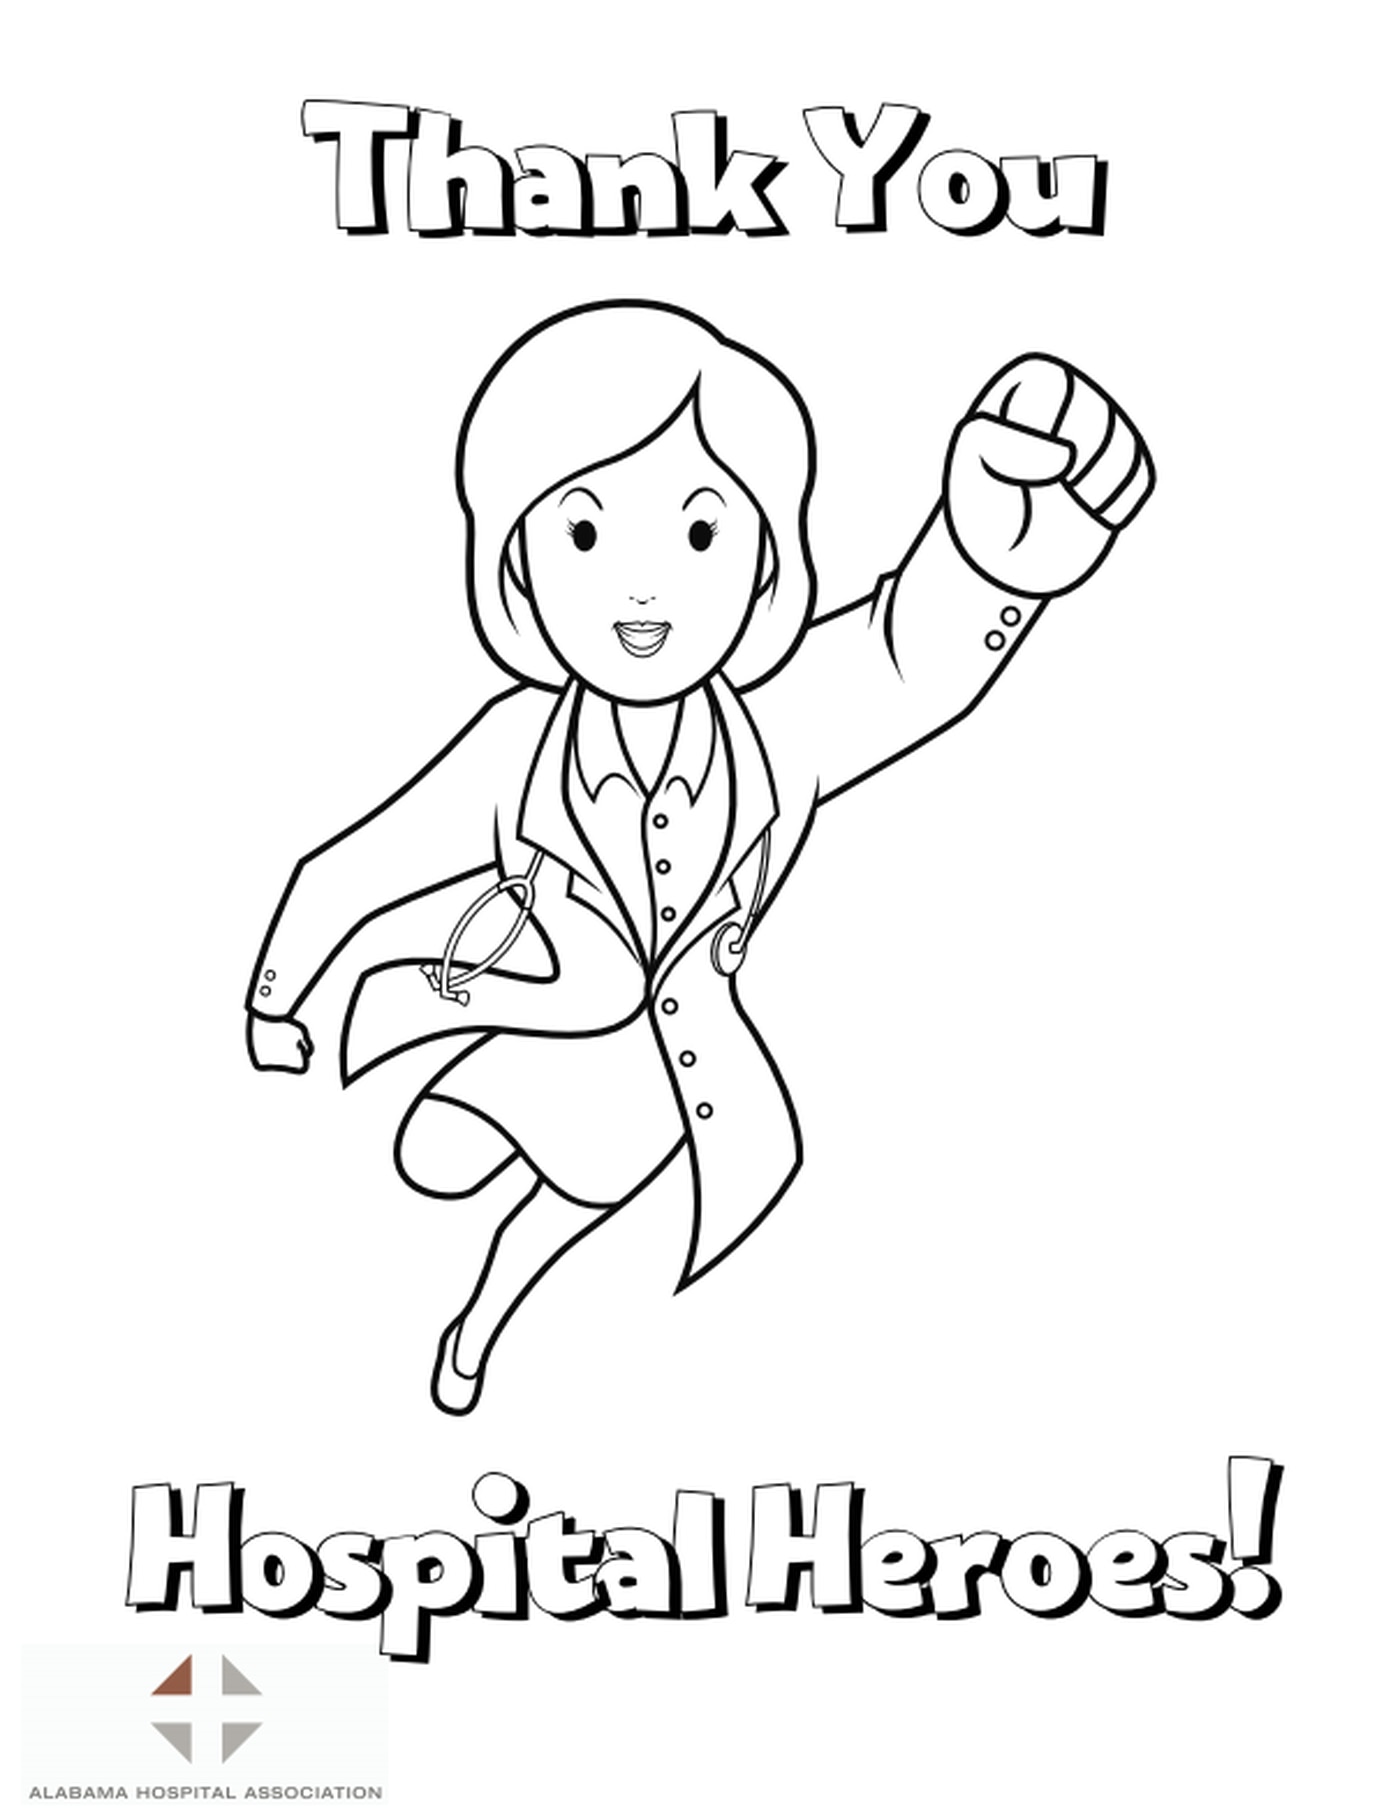 Alabama Hospital Association offers free coloring pages to kids